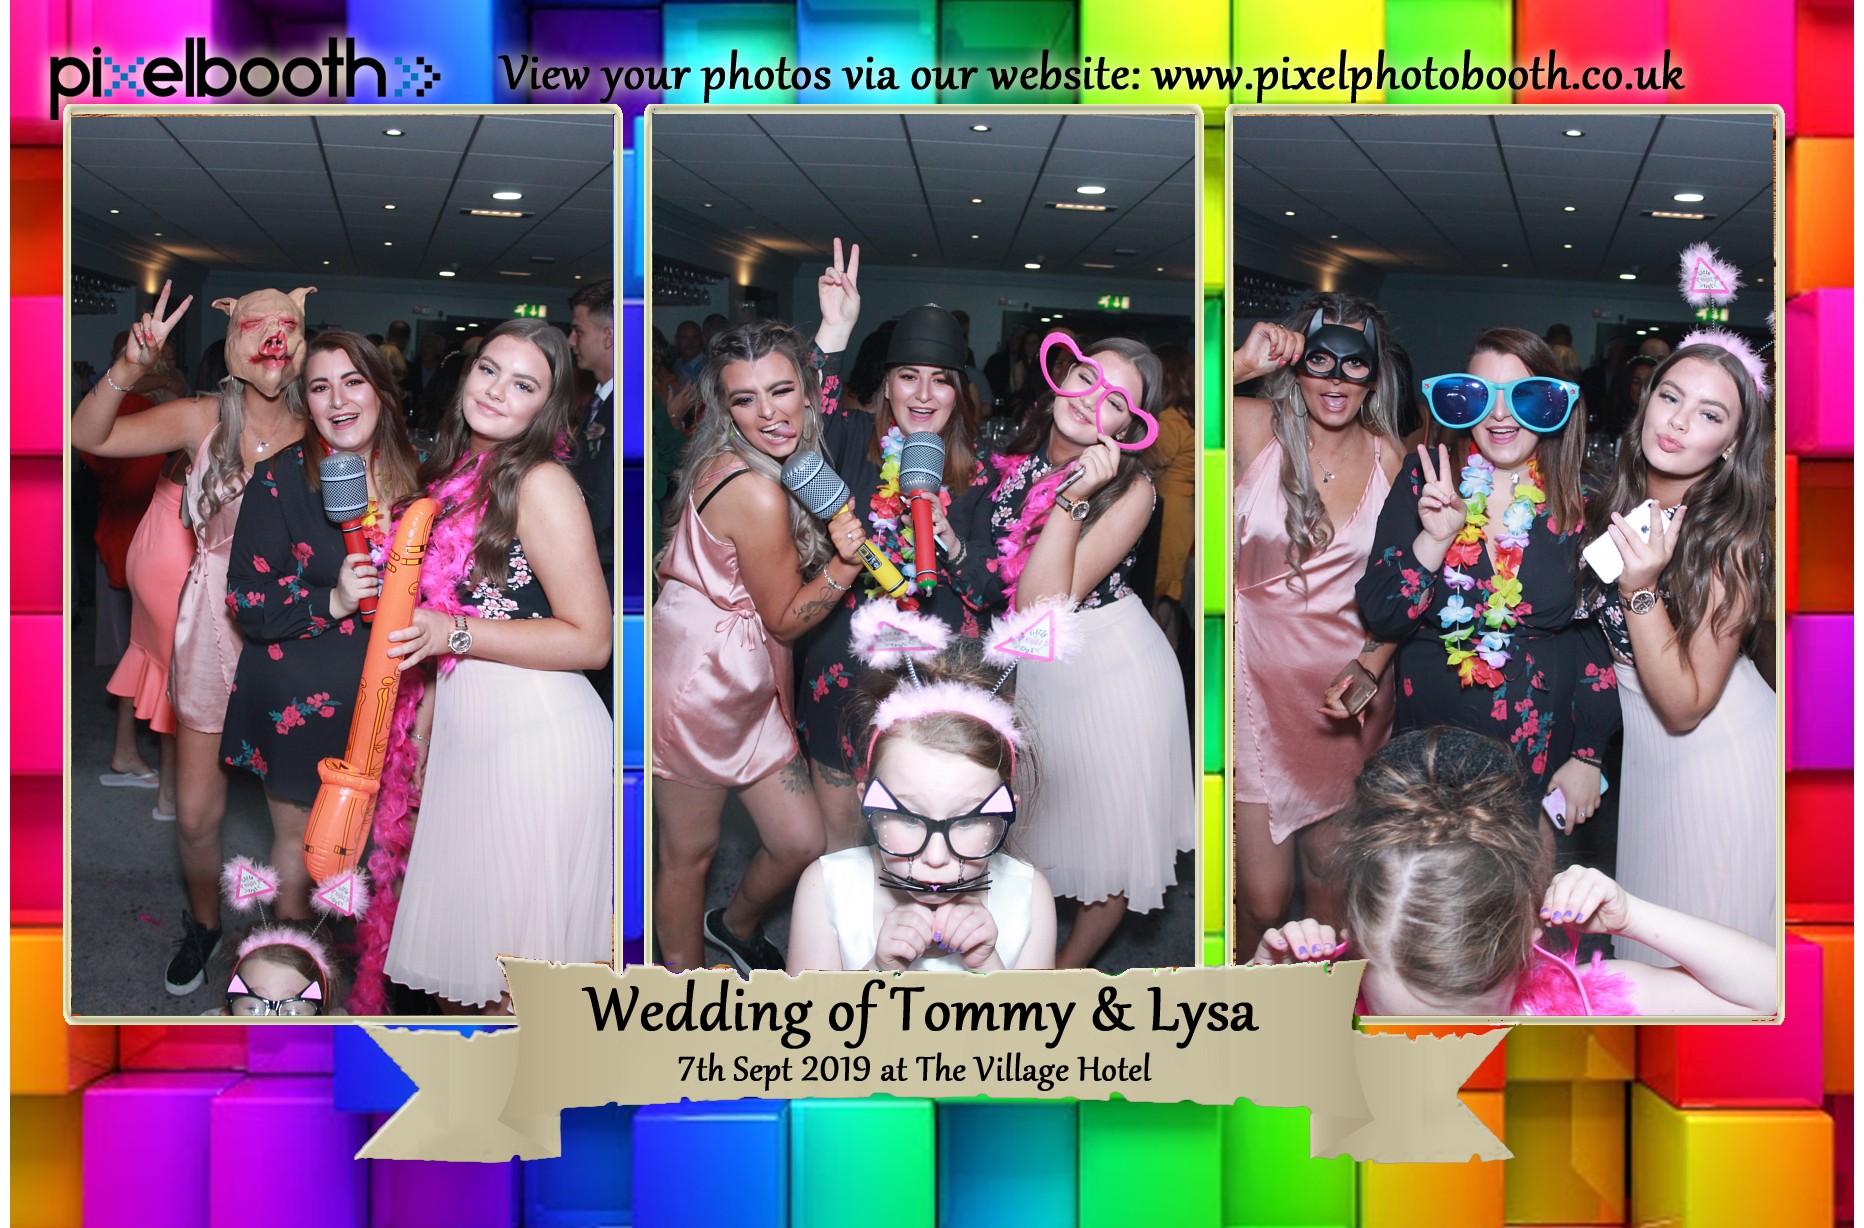 7th Sept 2019: Tommy and Lysa's Wedding at The Village Hotel